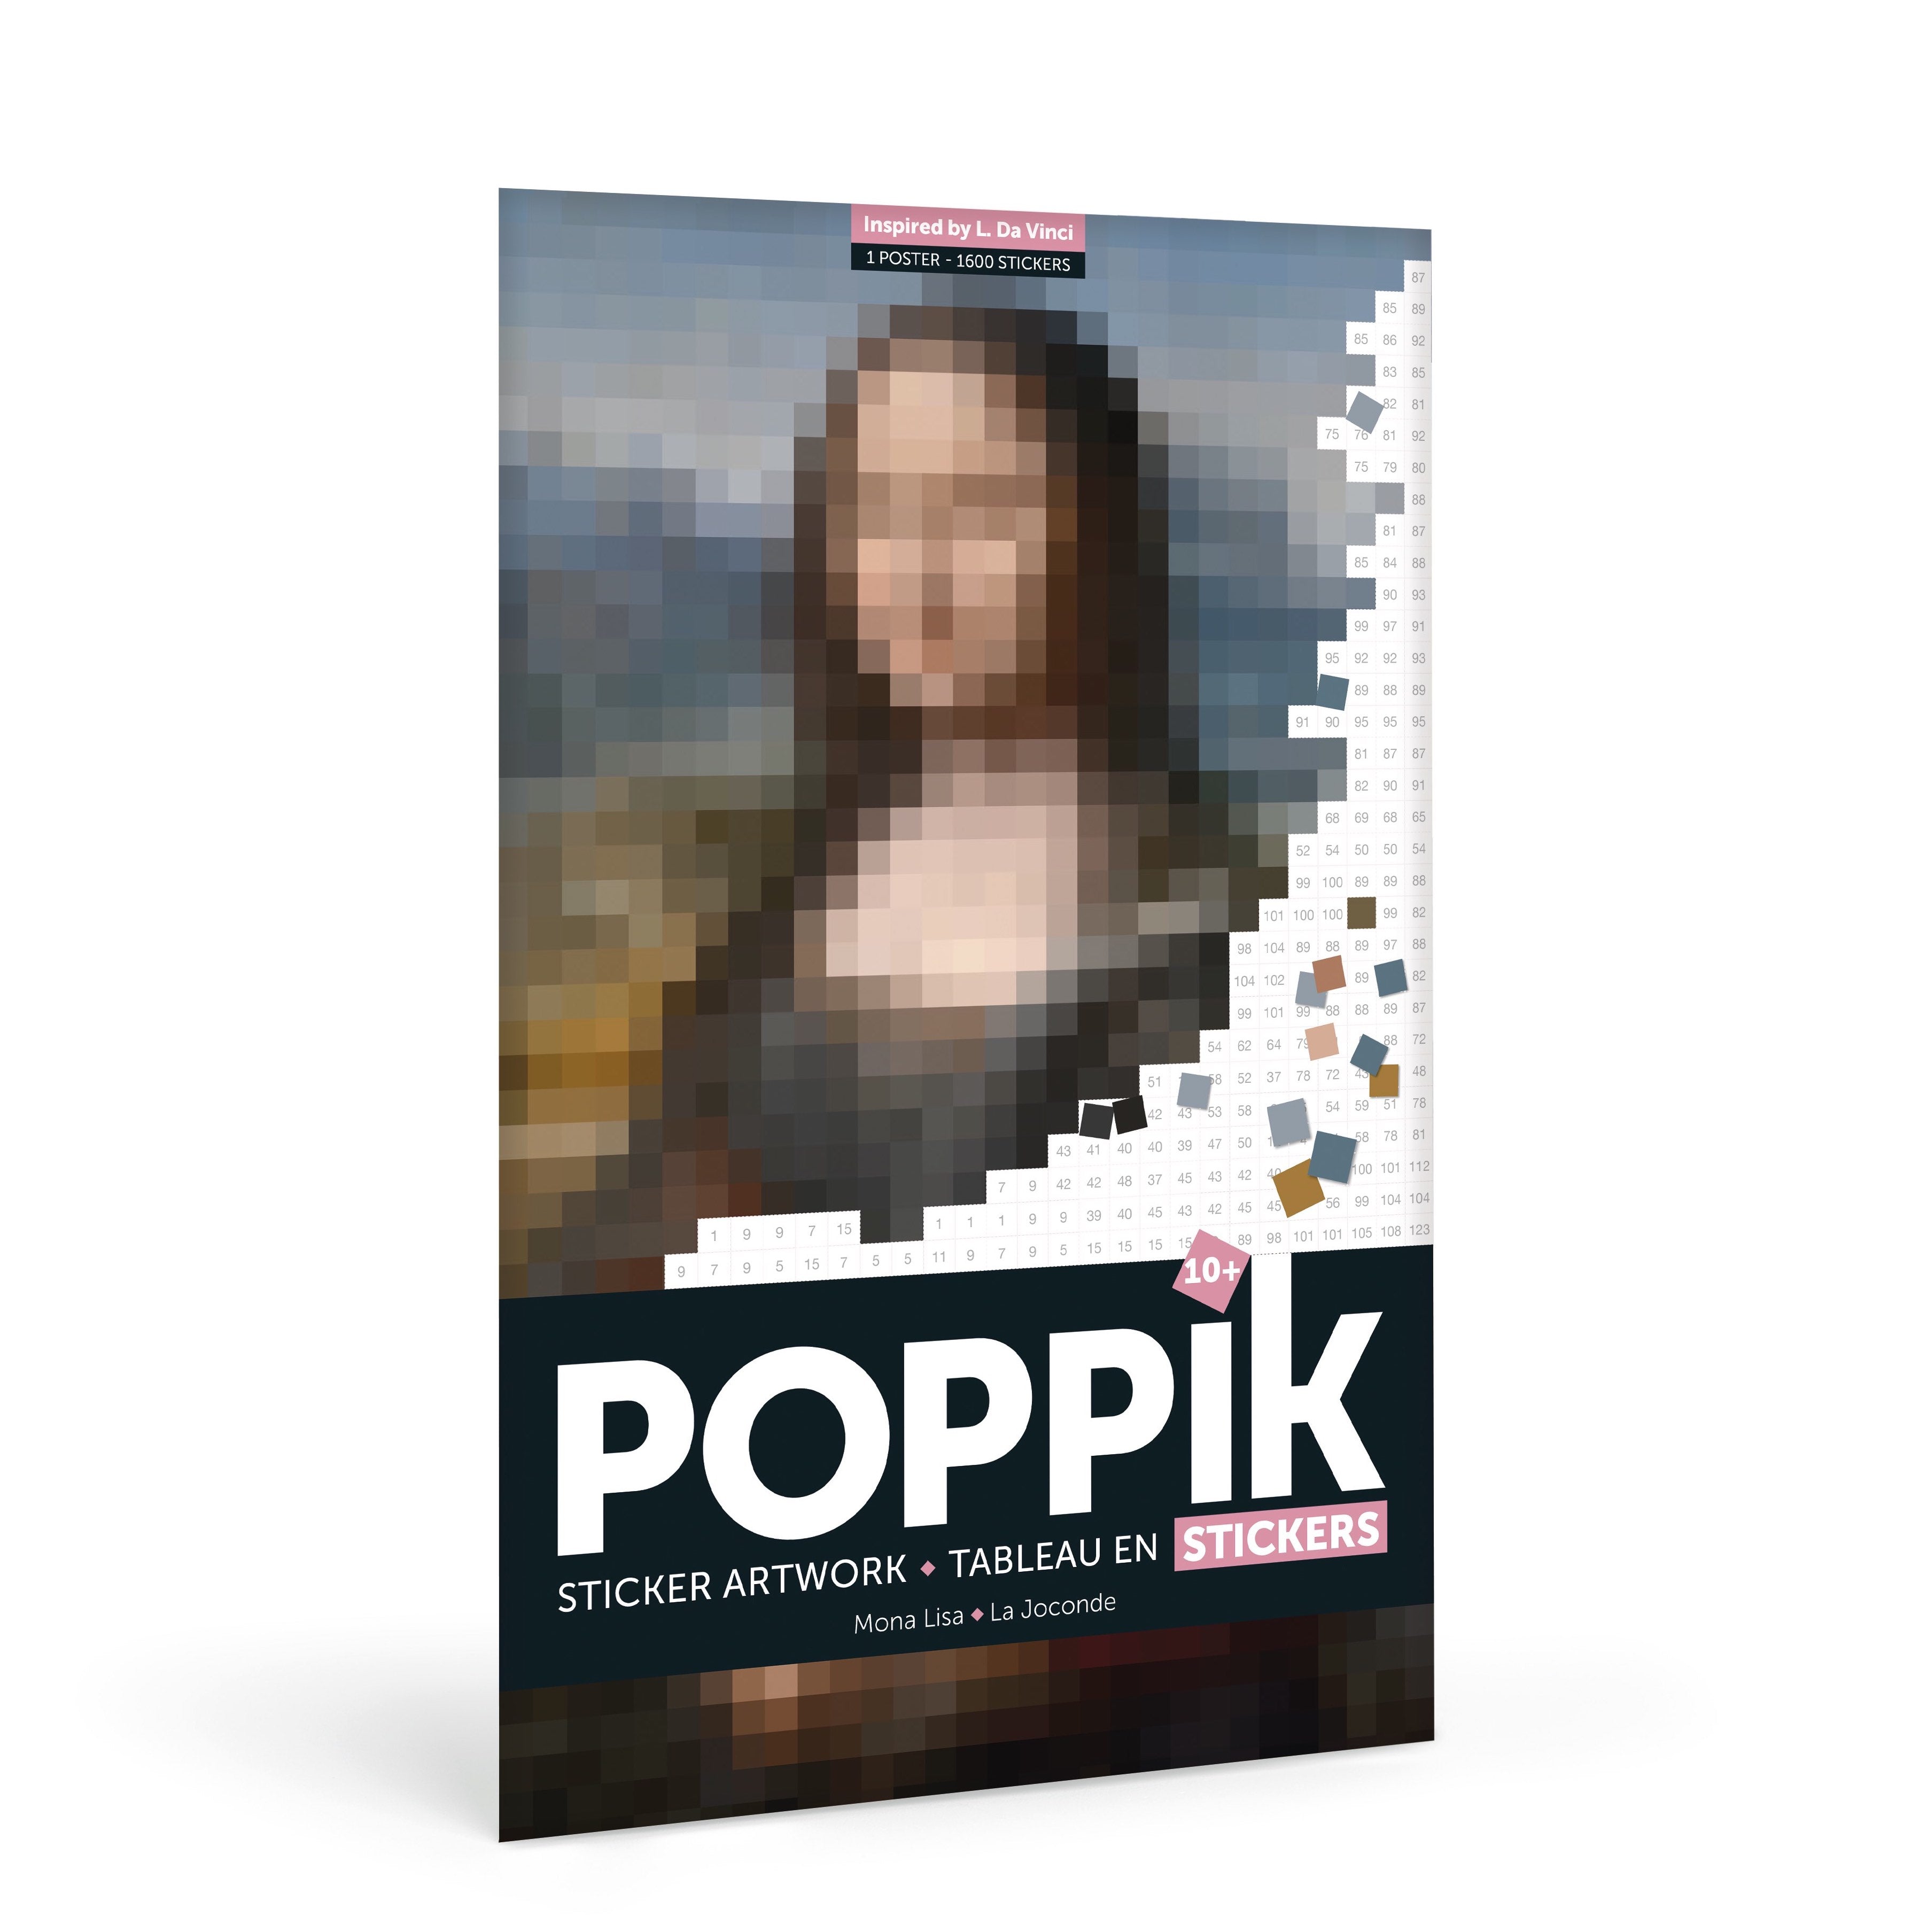 Large Poster with 1600 stickers – Mona Lisa